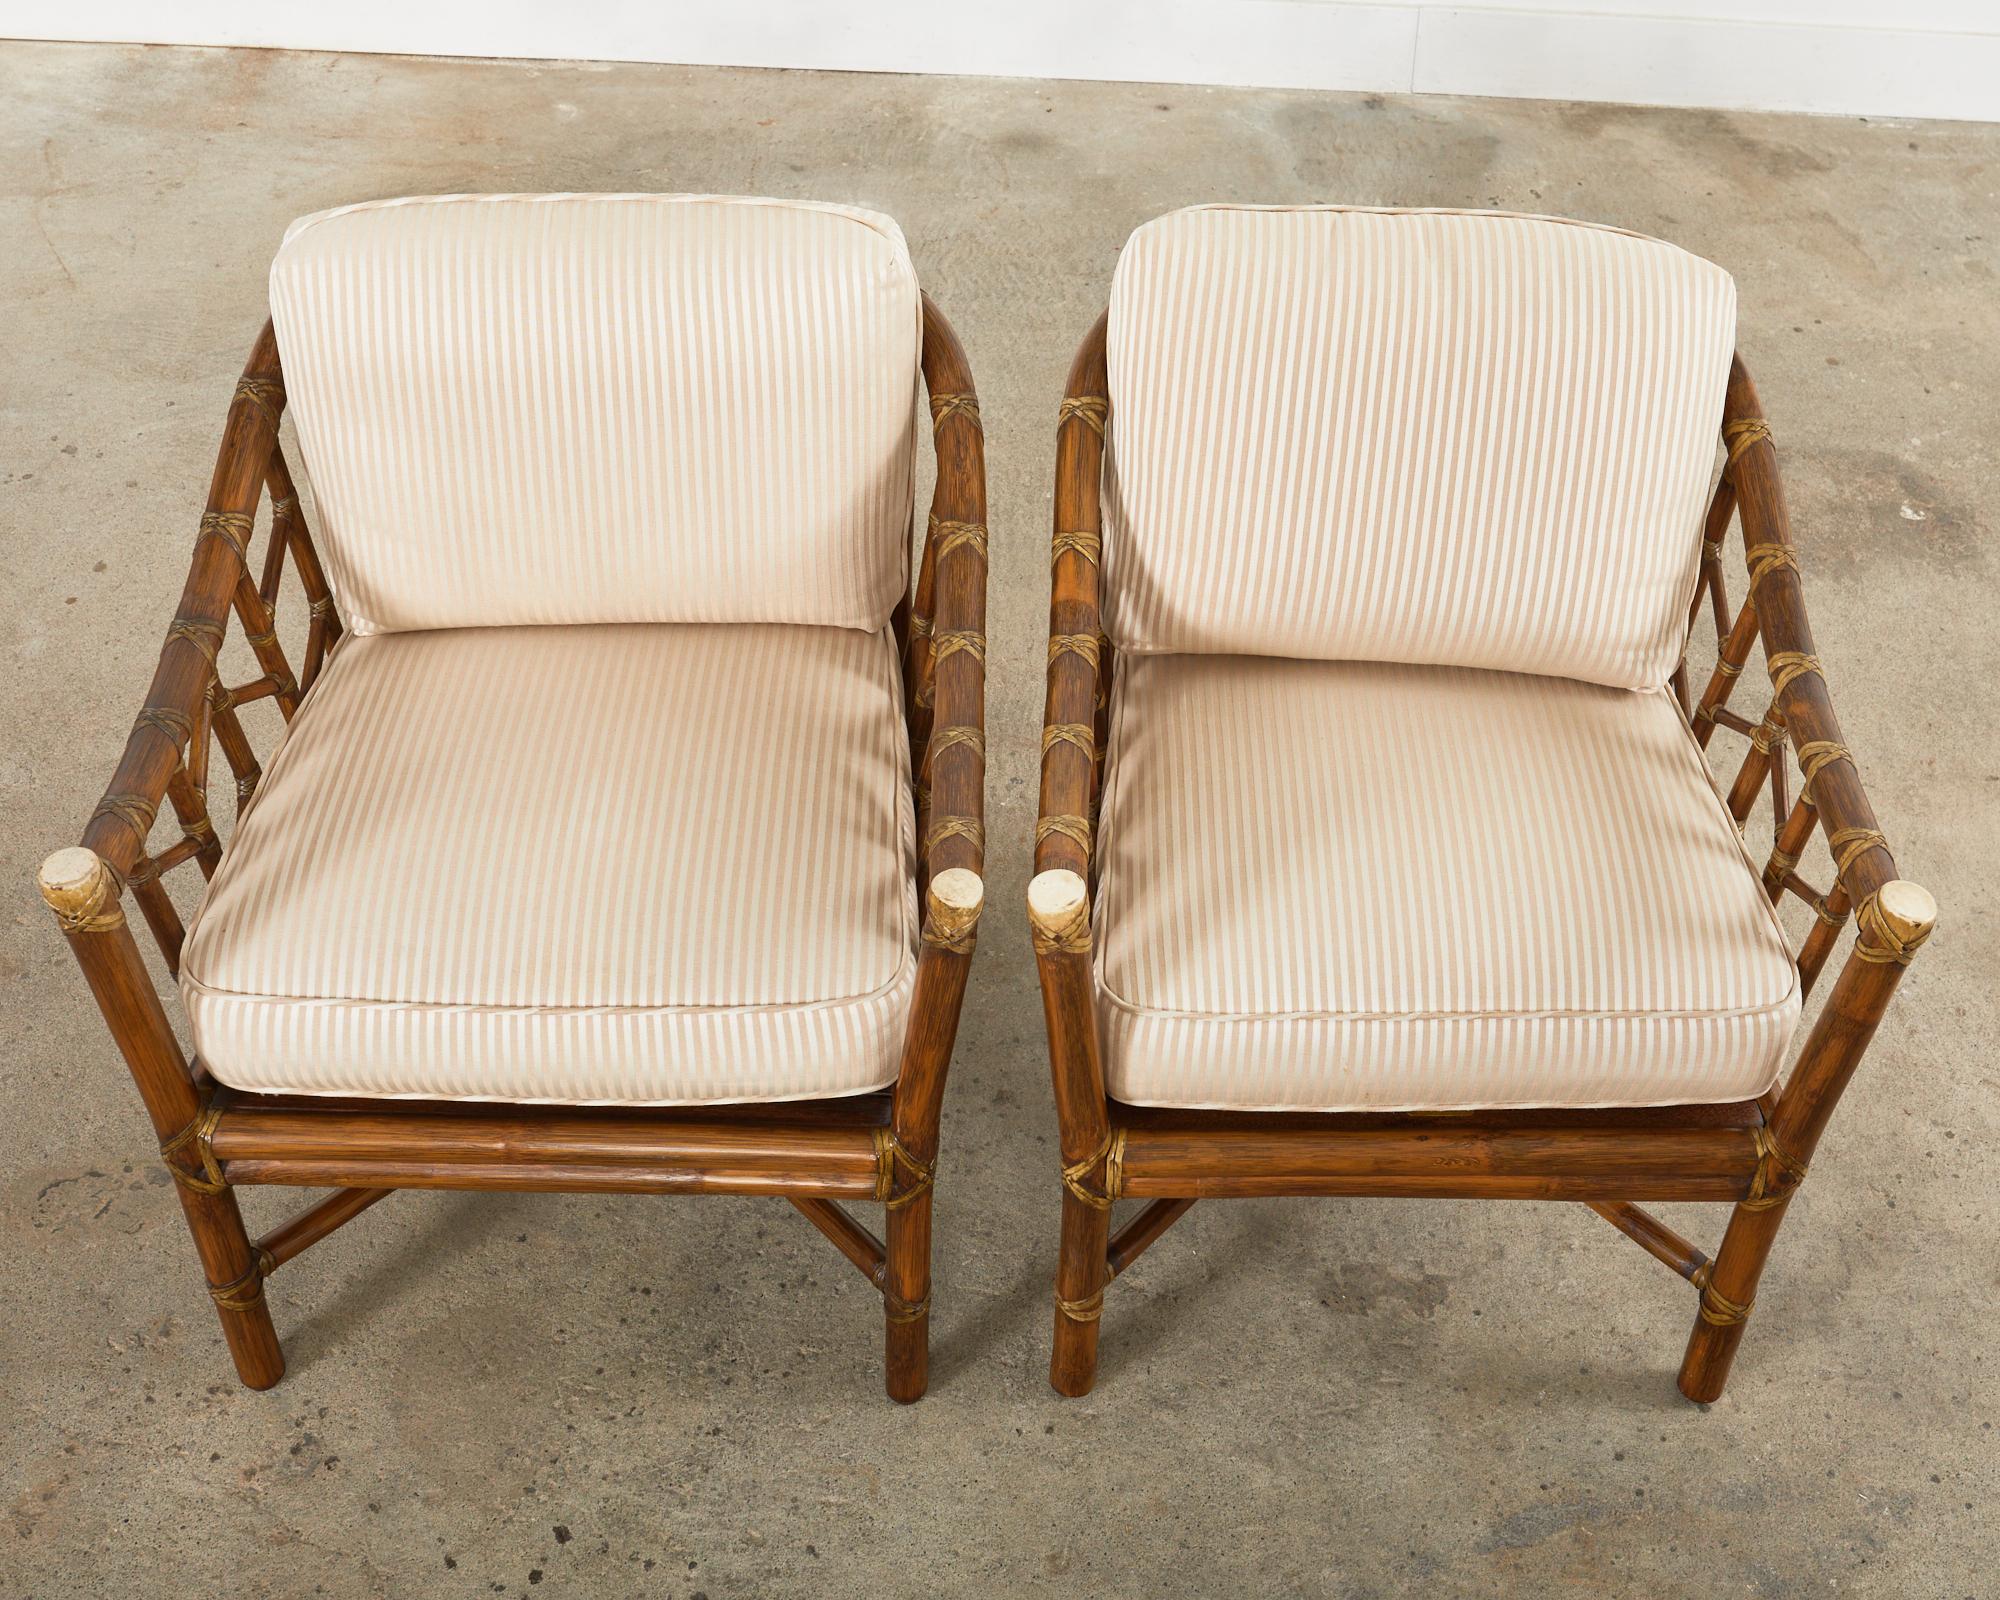 Hand-Crafted Pair of McGuire Organic Modern Rattan Lounge Chairs